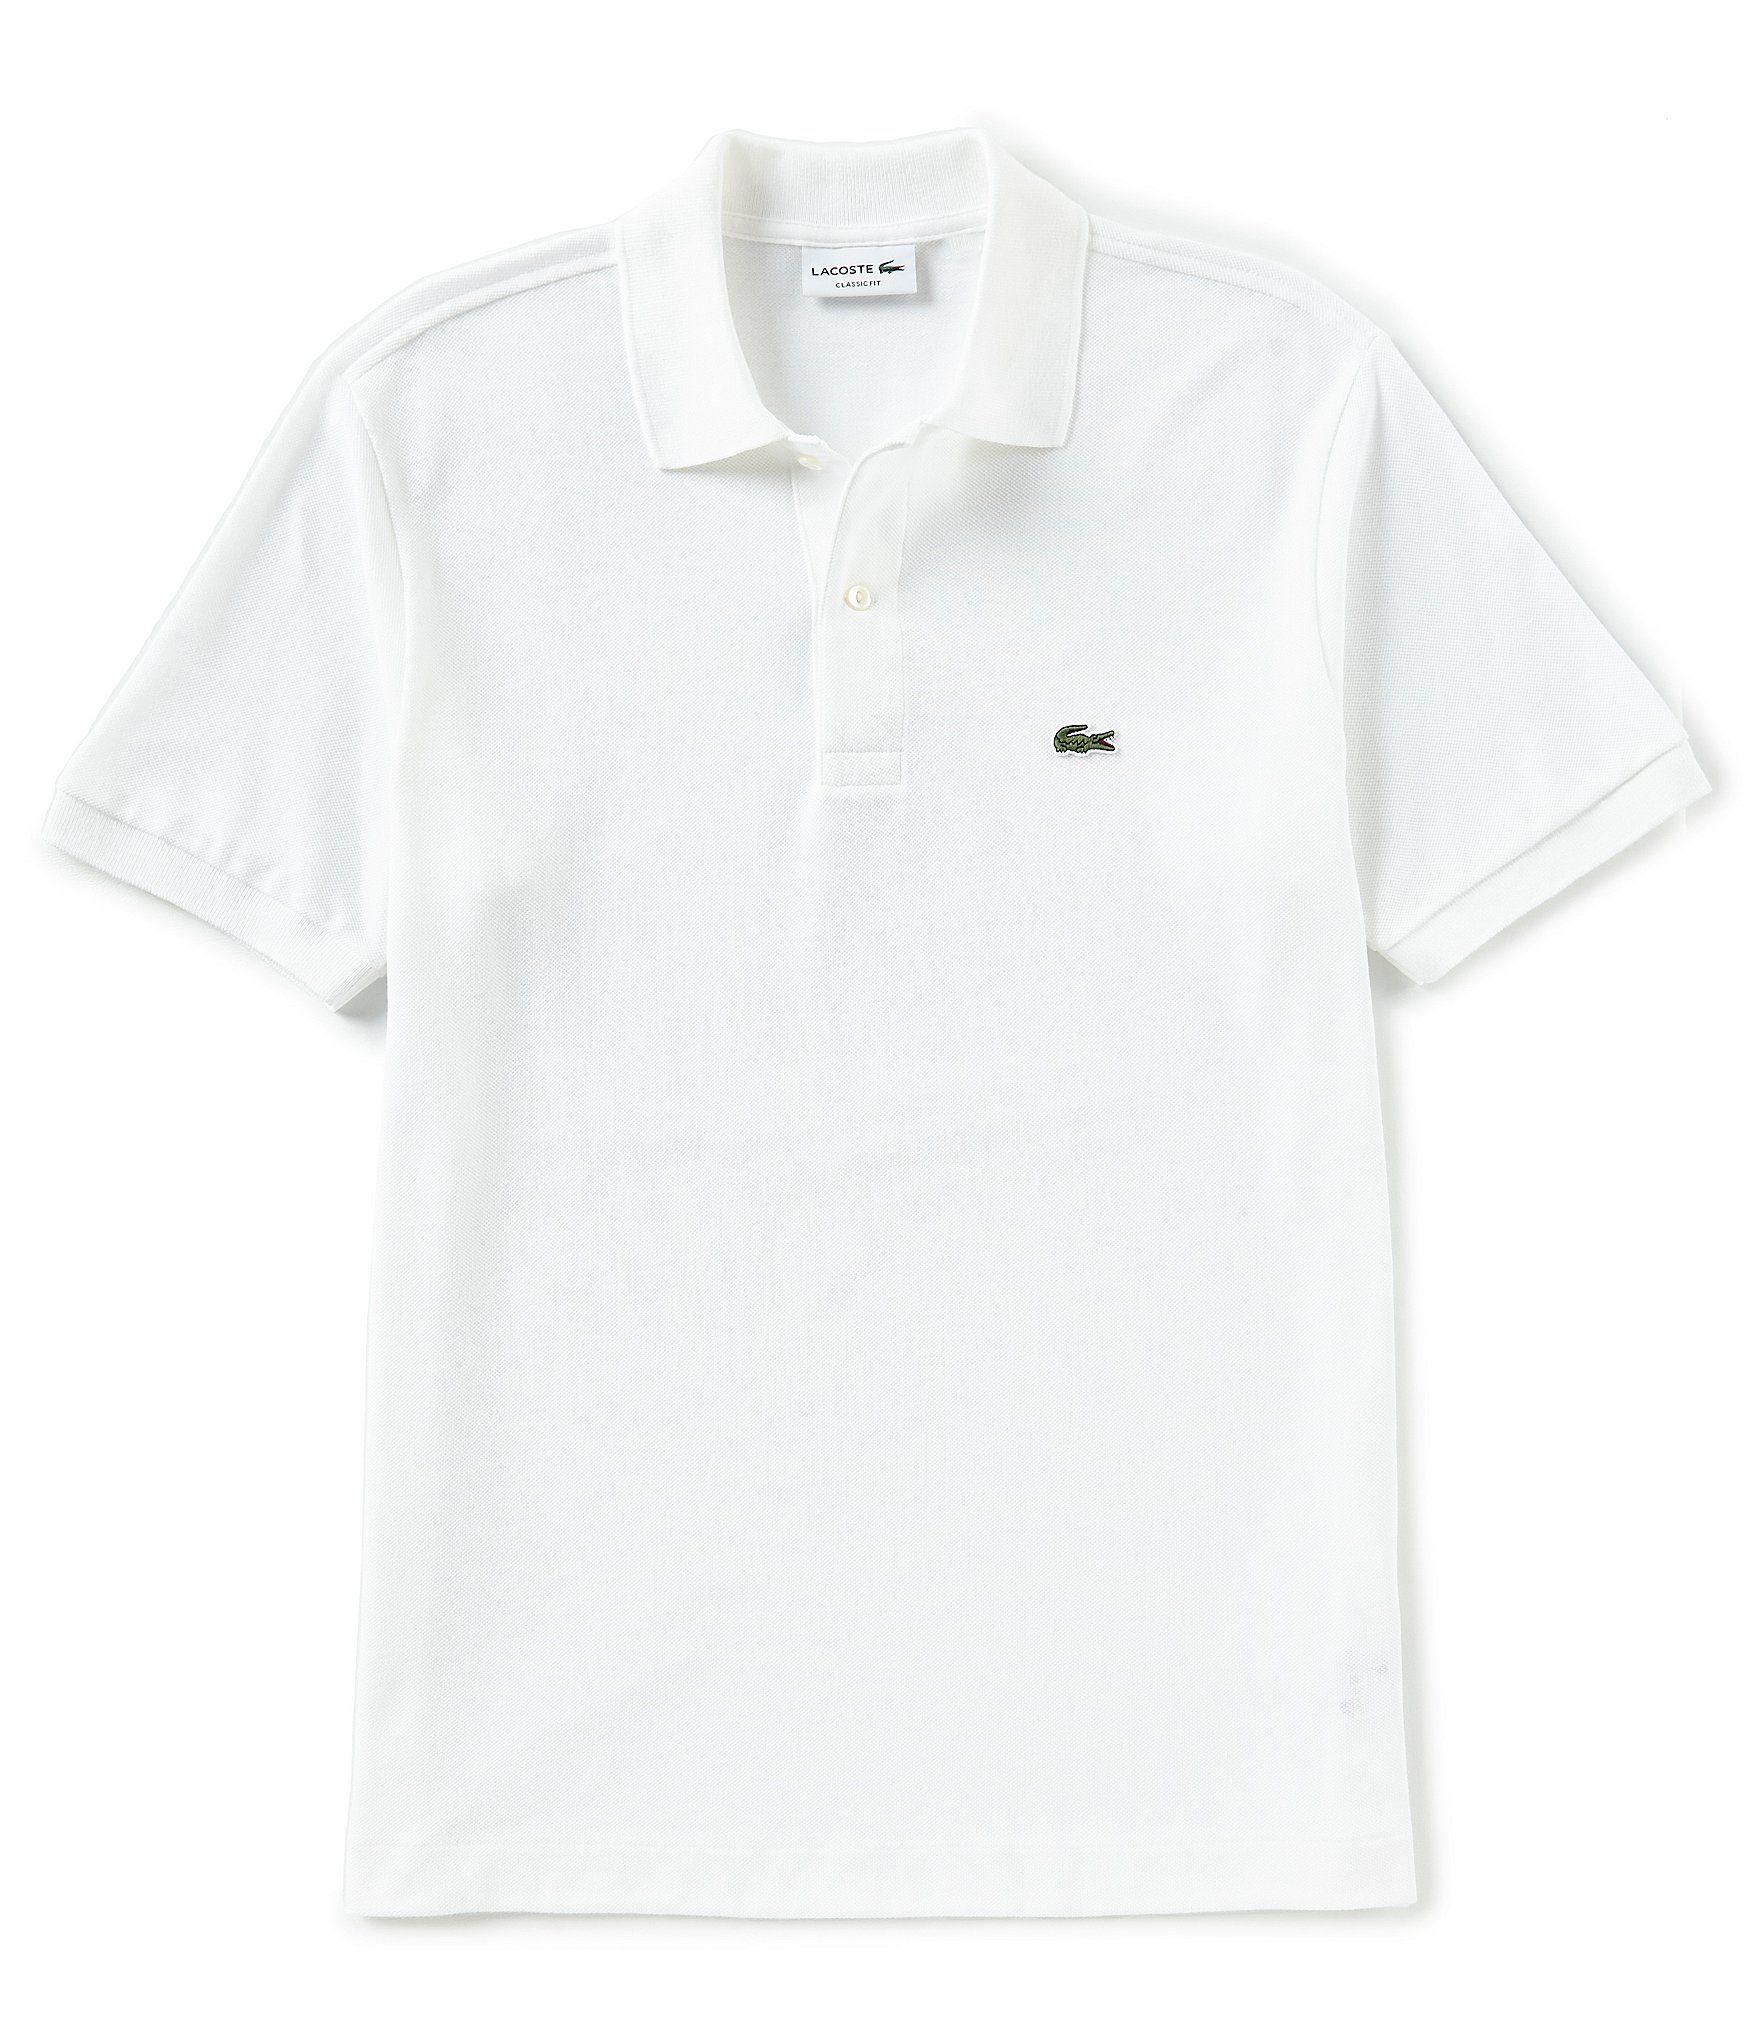 all white lacoste outfit